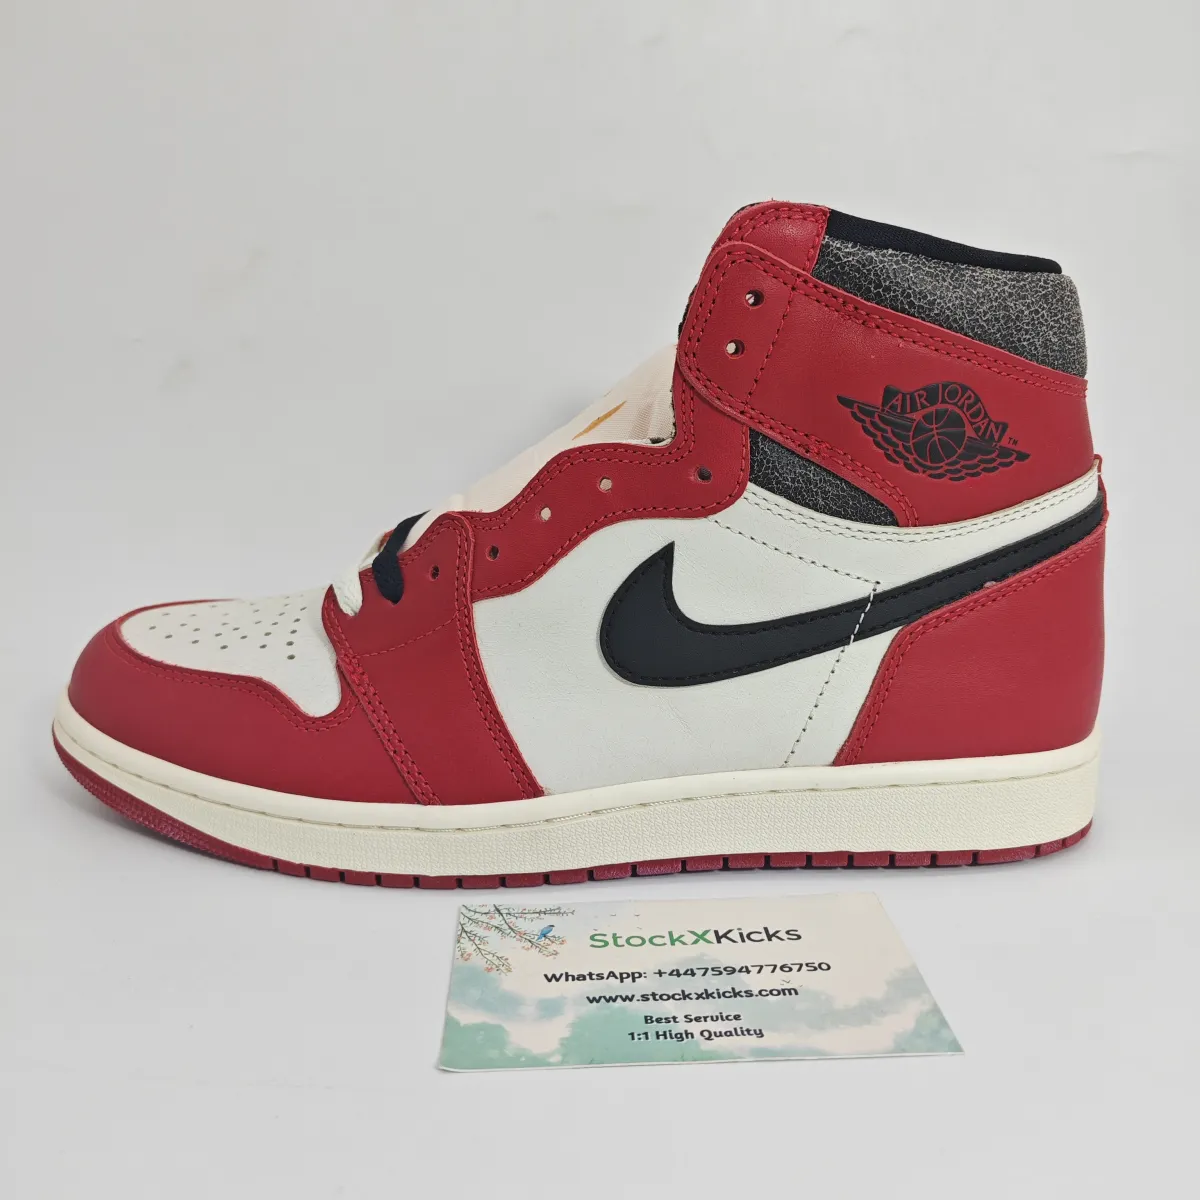 Replica shoes website - stockx kicks offers best Jordan 1 fake - Jordan 1 lost and found reps for cheap